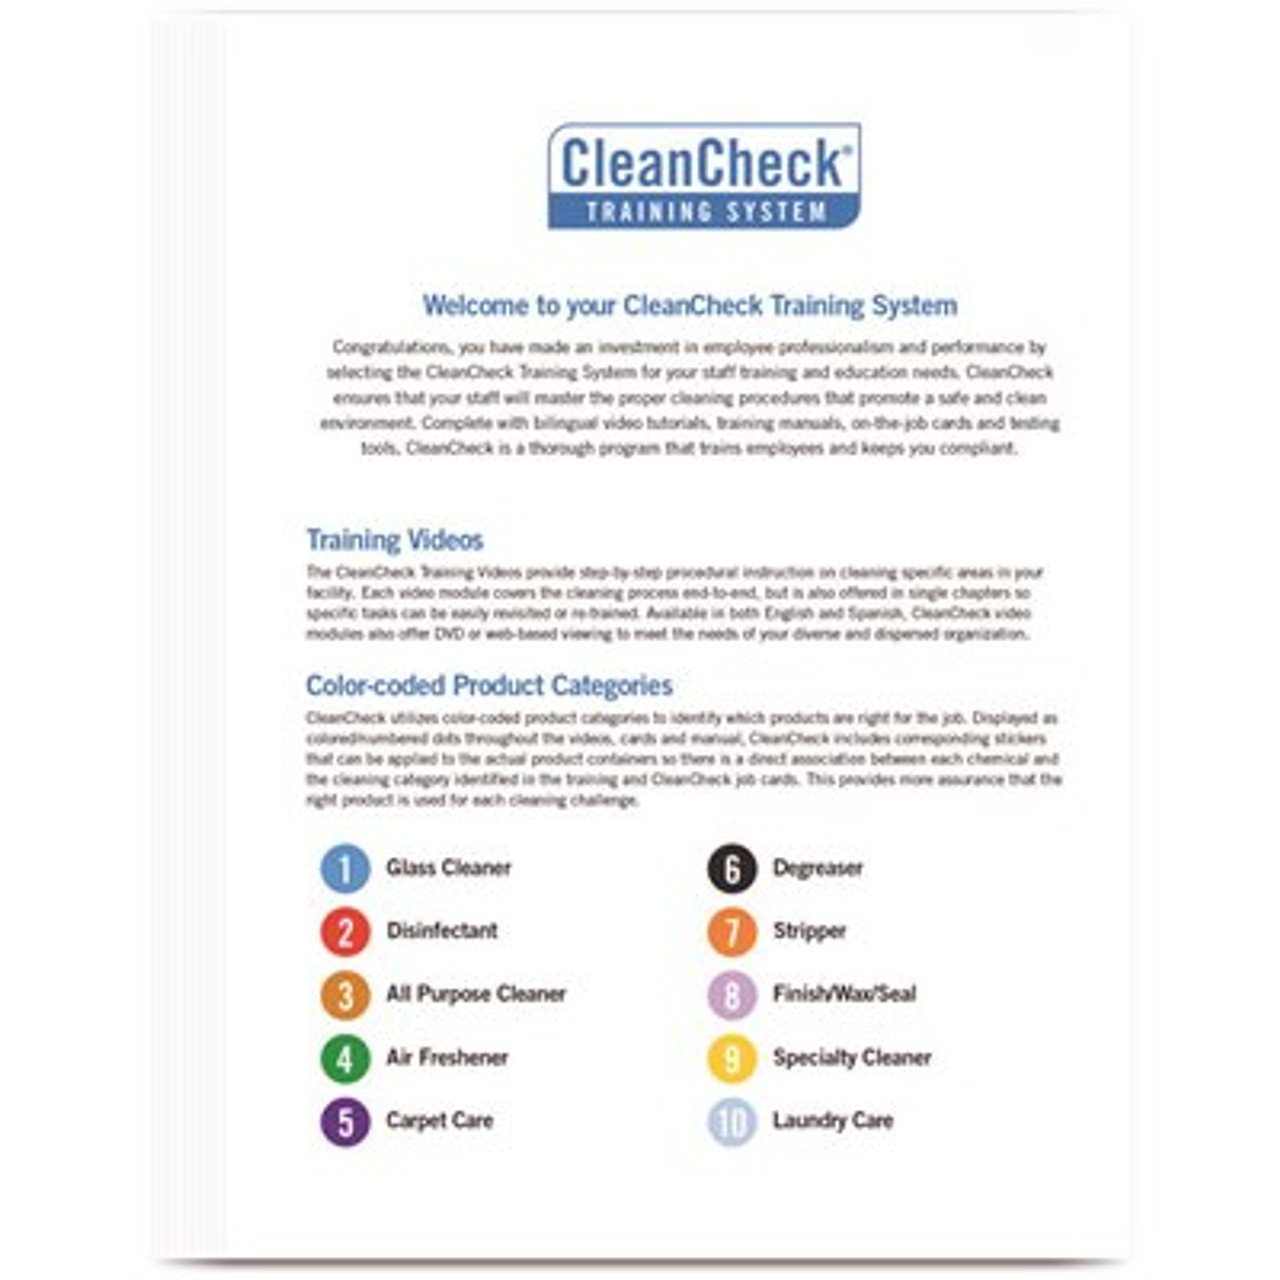 Cleancheck Trainer Manual